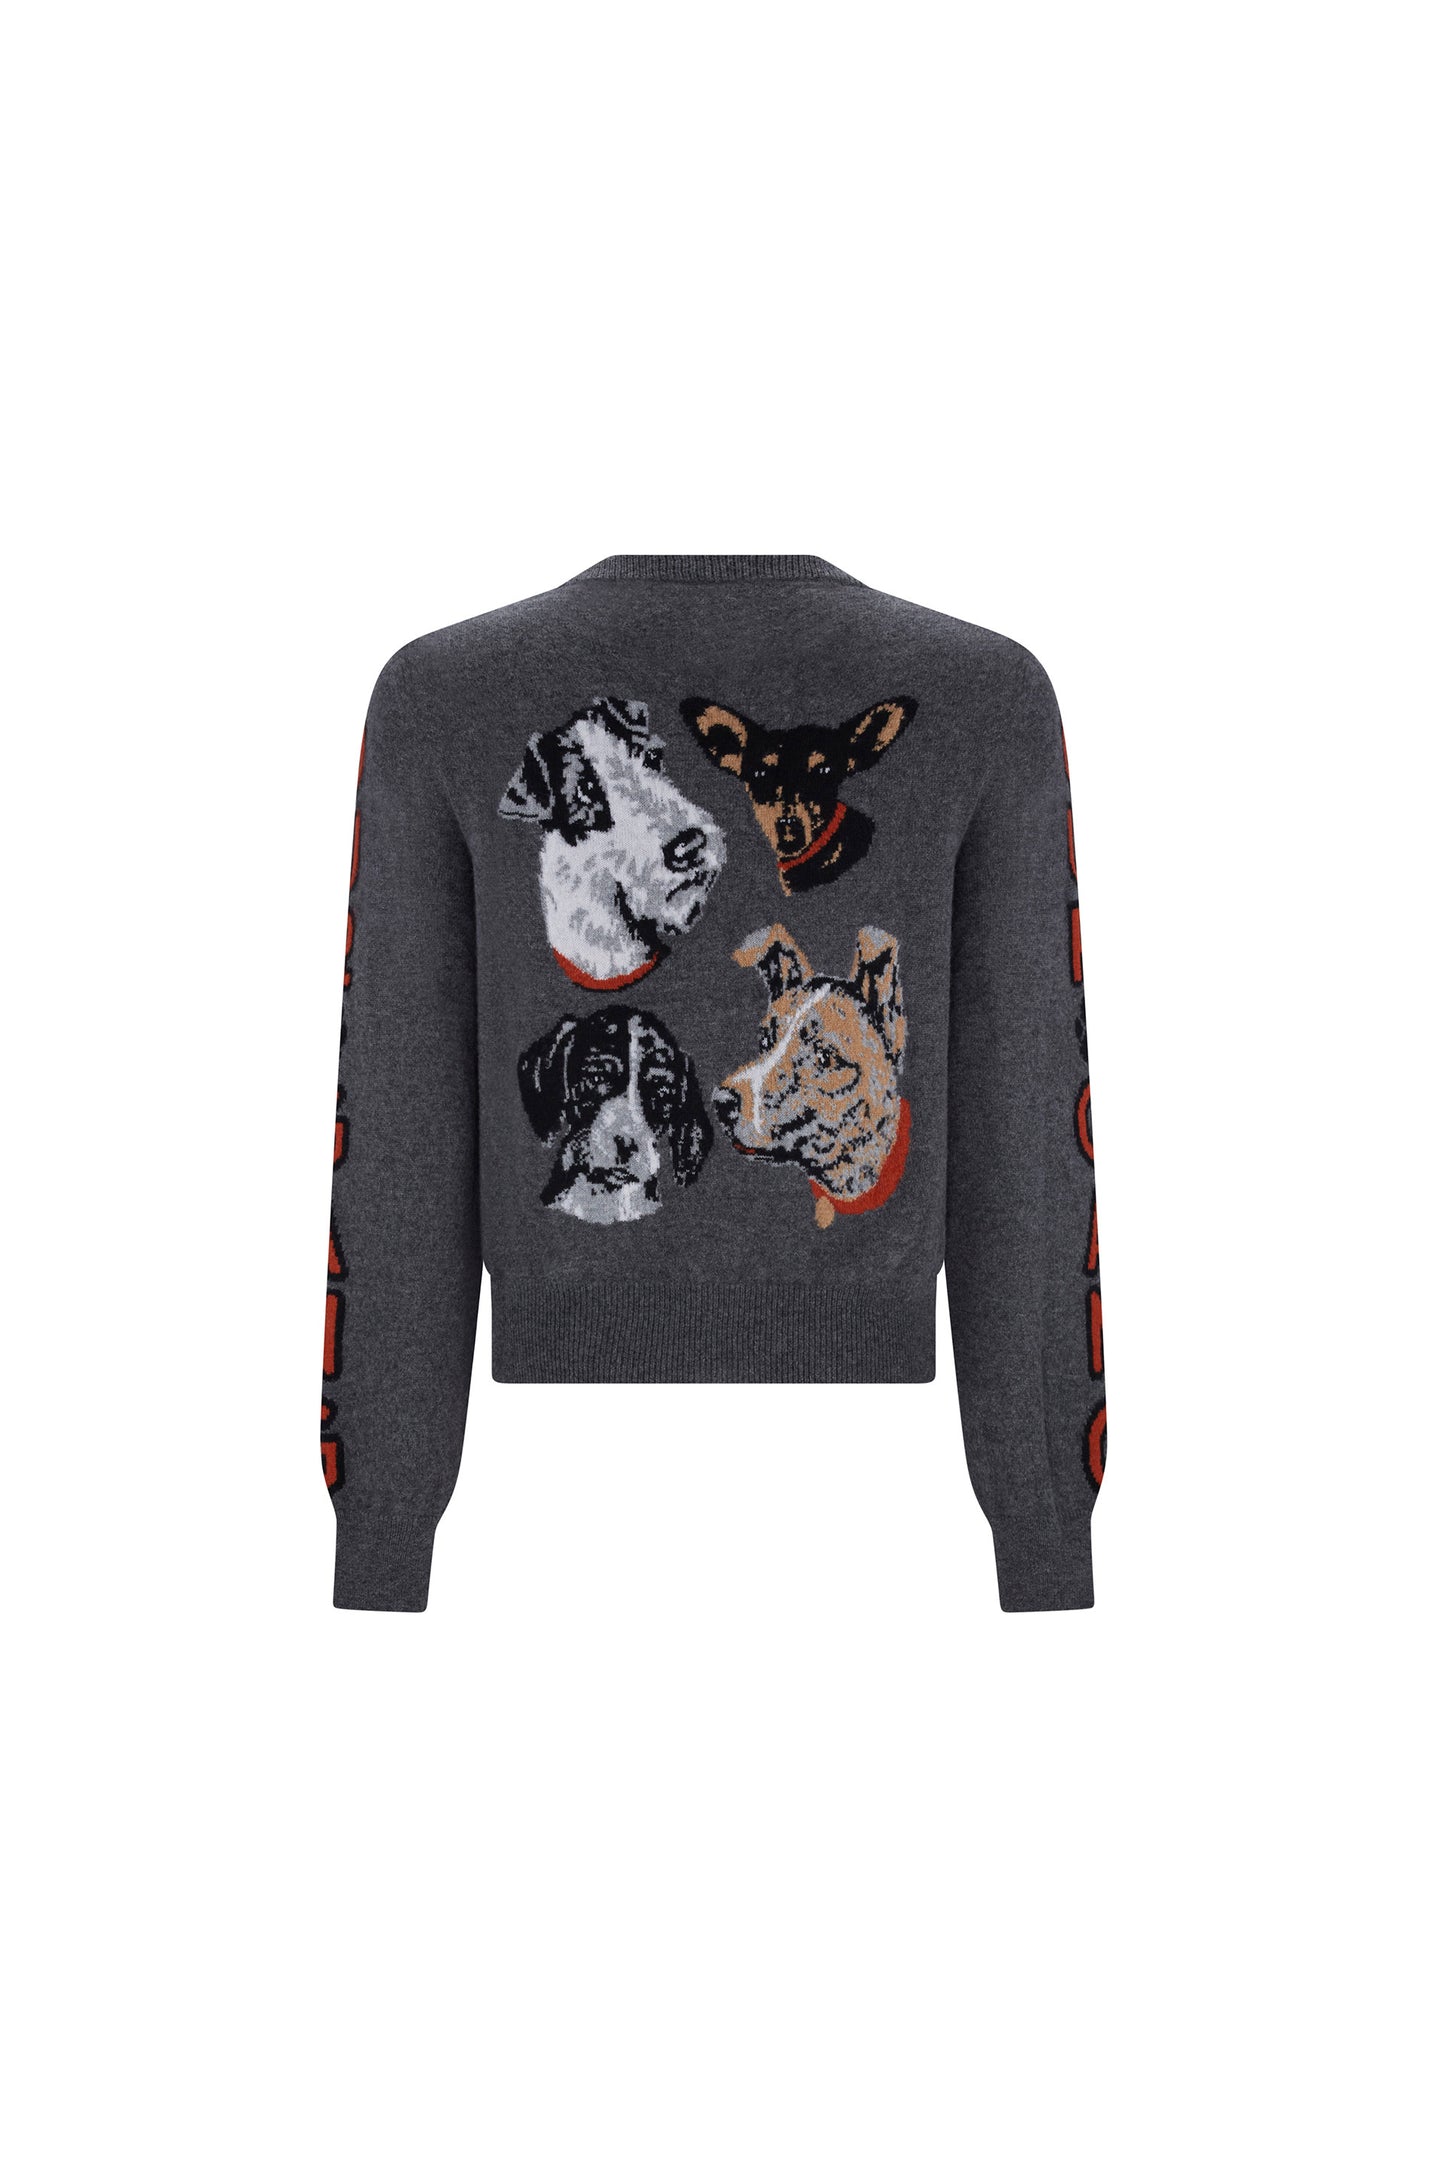 'Our Gang' Shrunken Pullover Sweater - SWEATERS - Libertine